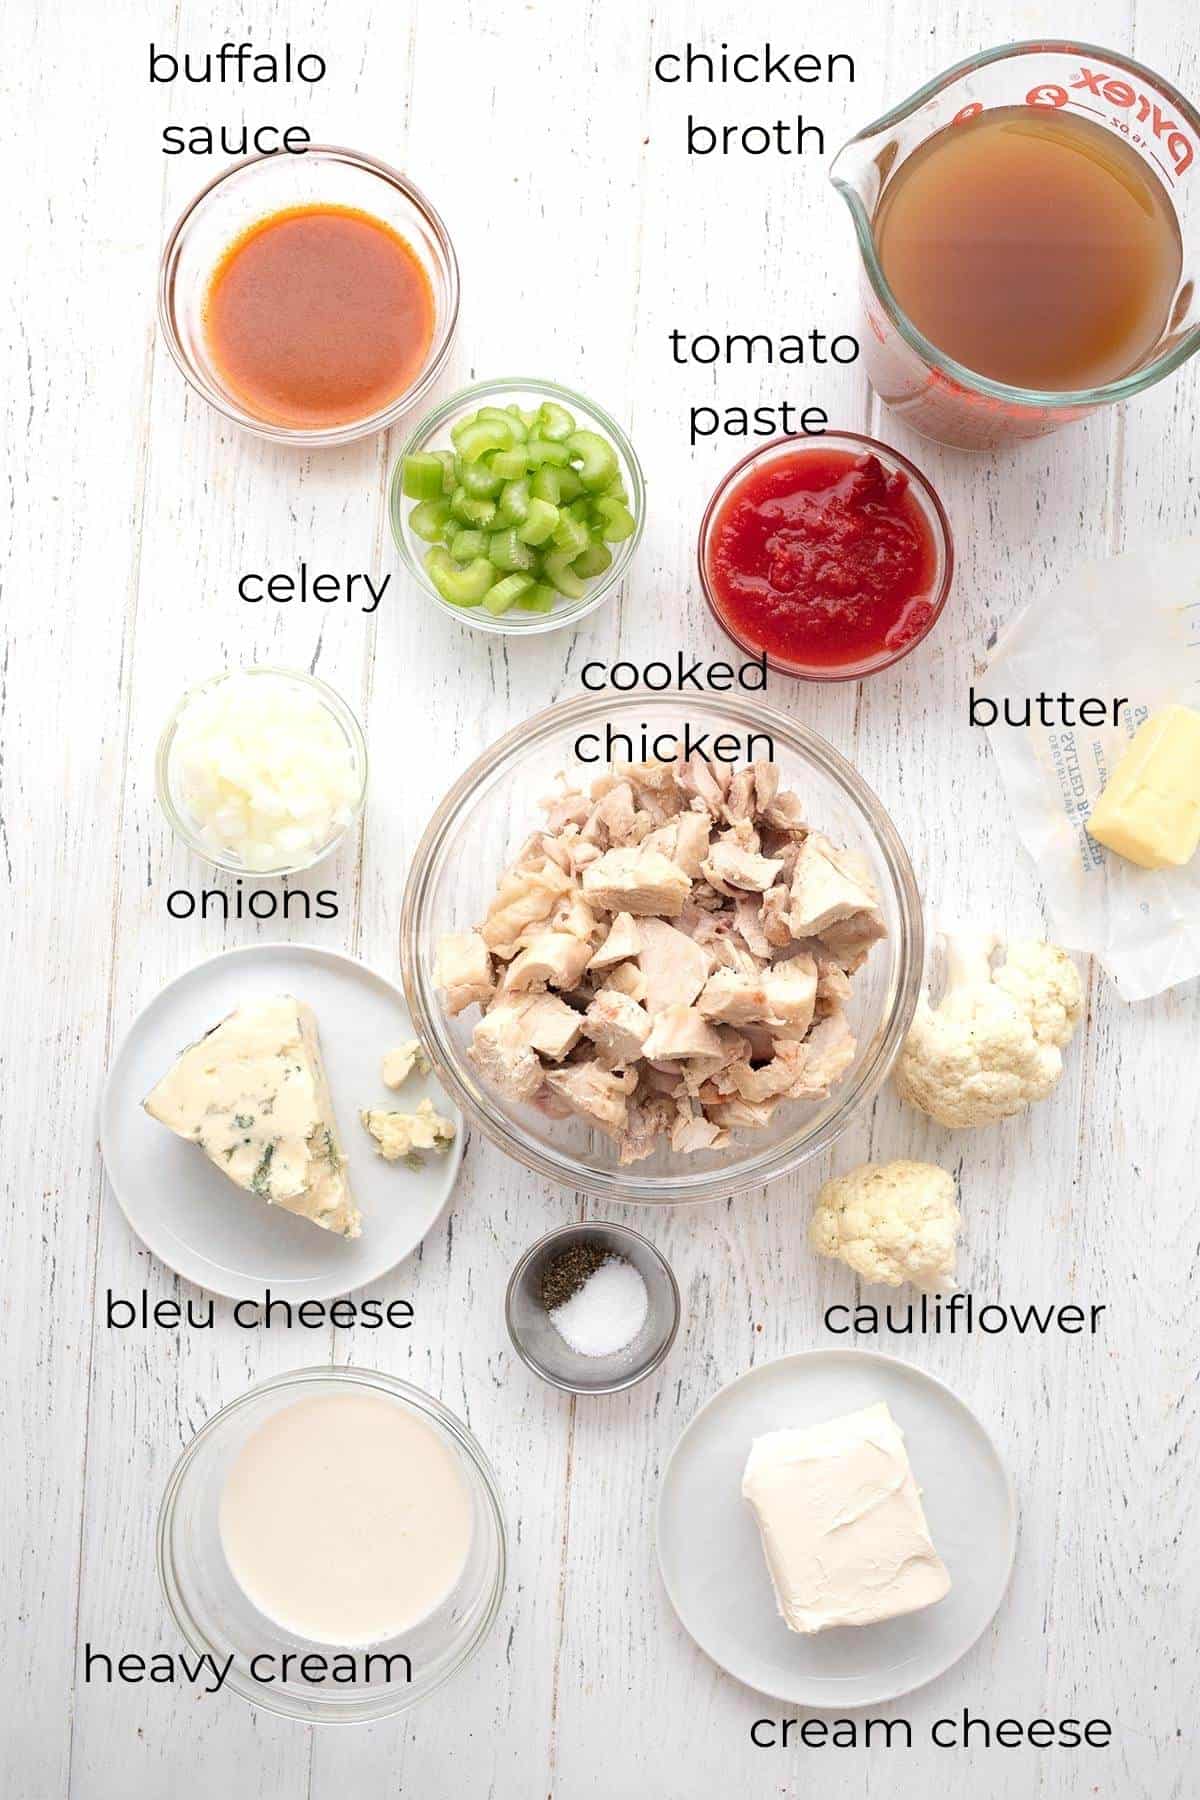 Top down image of the ingredients required for Buffalo Chicken Soup.